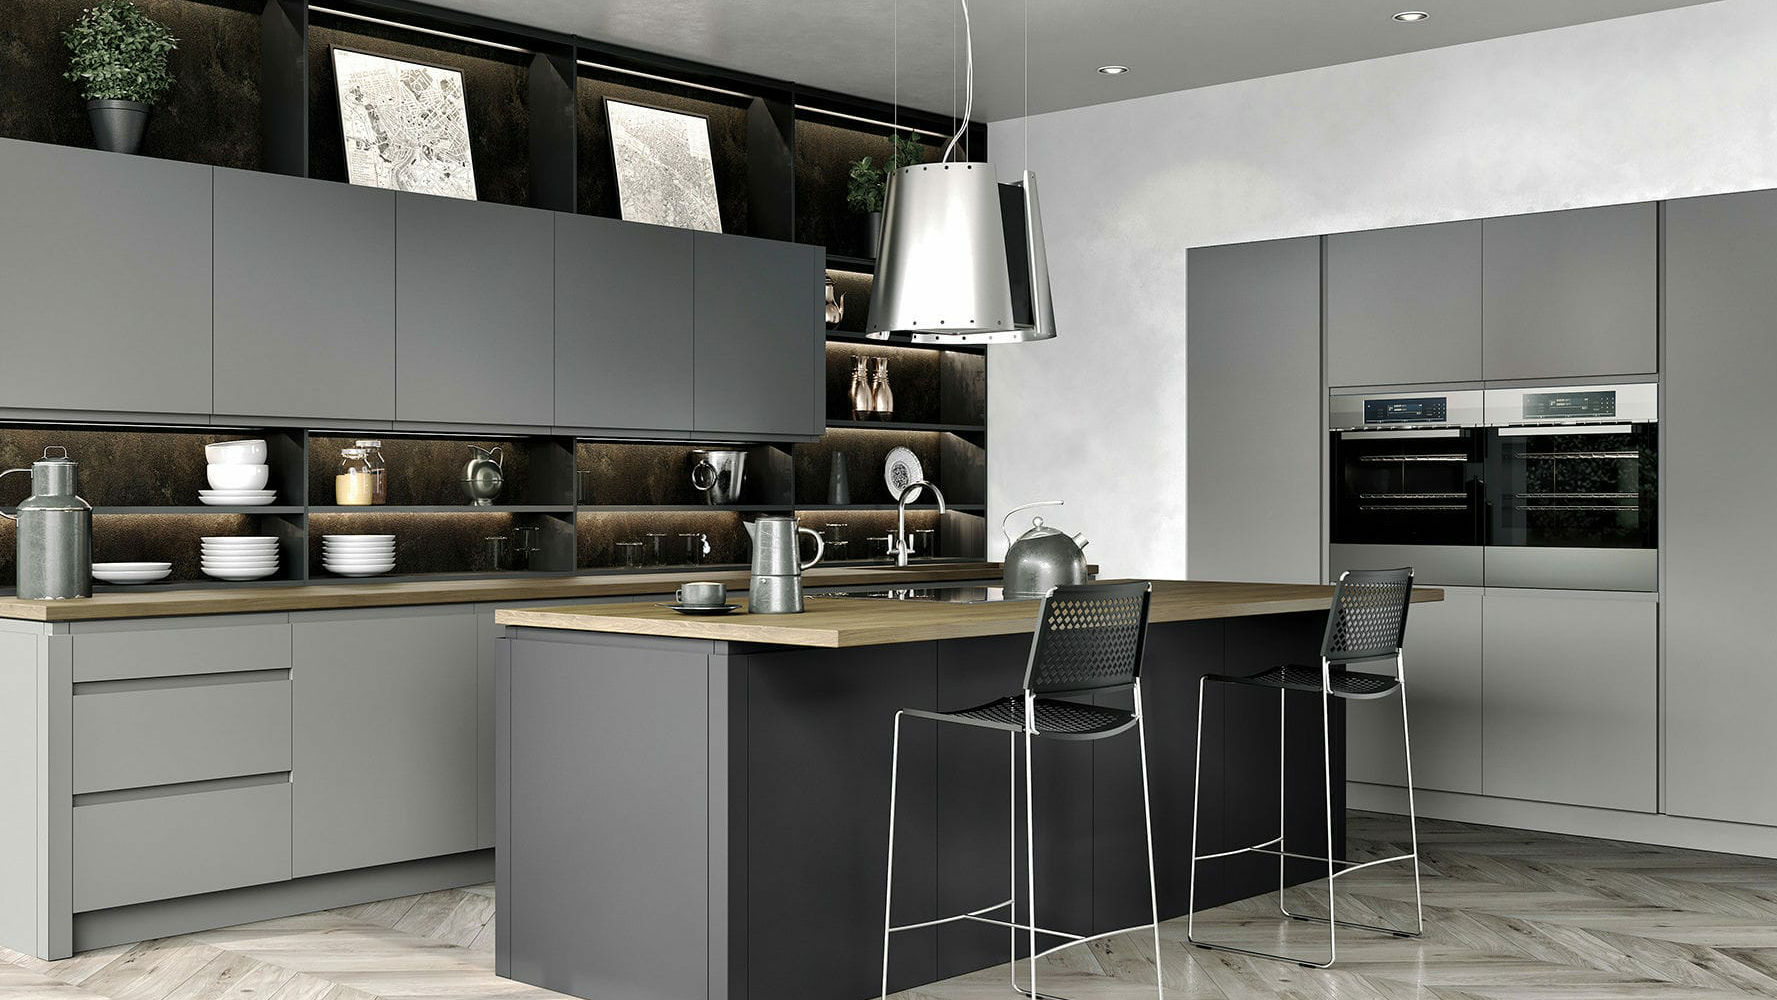 Handleless matt dust grey kitchens featuring a smooth finish for a subtle and sophisticated kitchens design